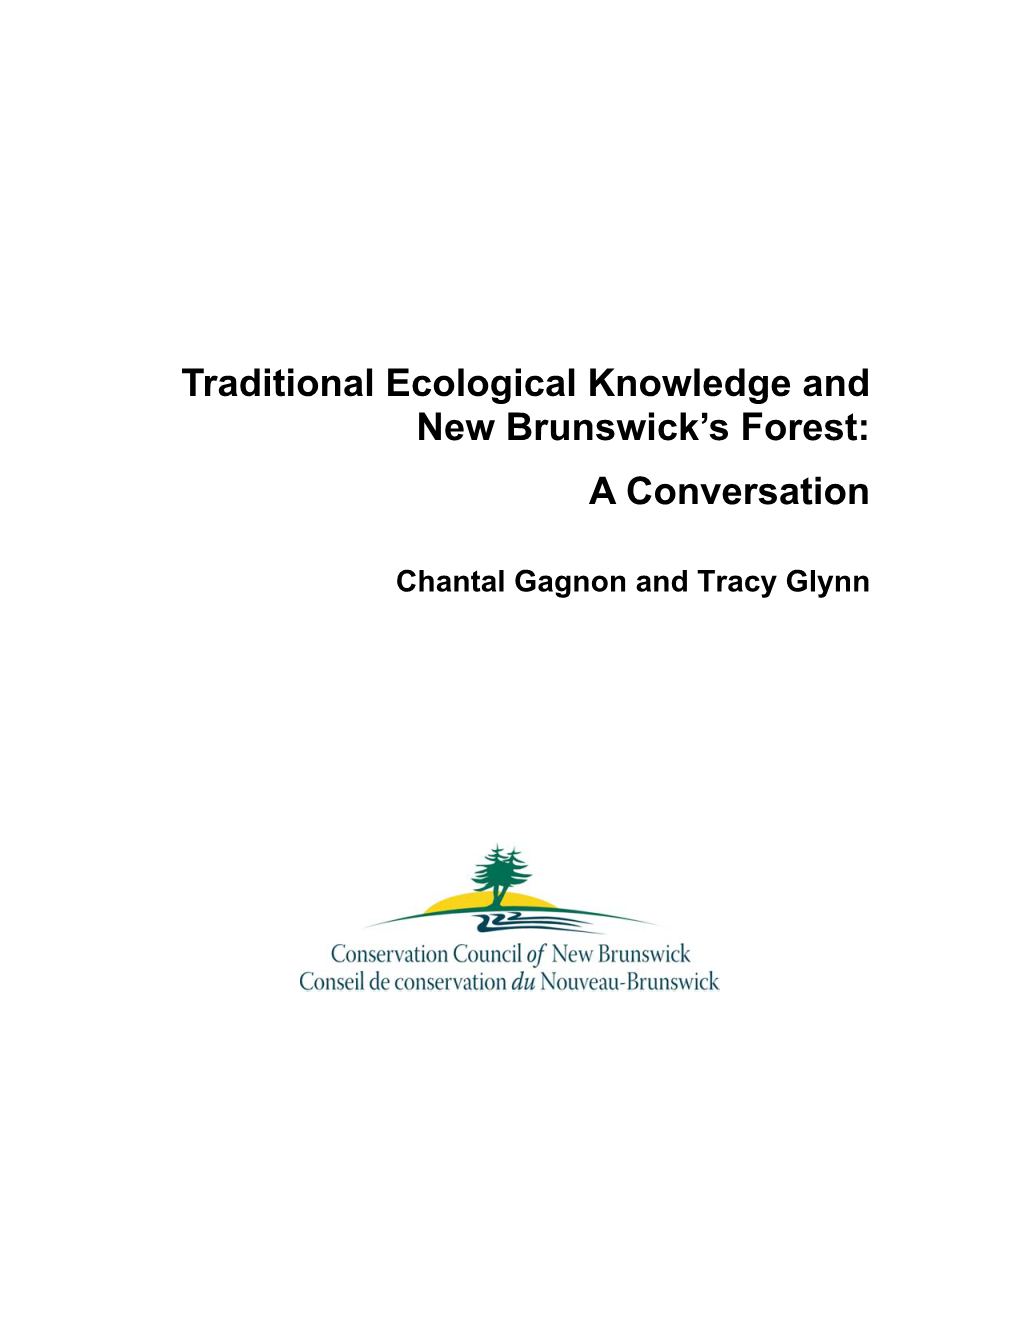 Traditional Ecological Knowledge and New Brunswick's Forest